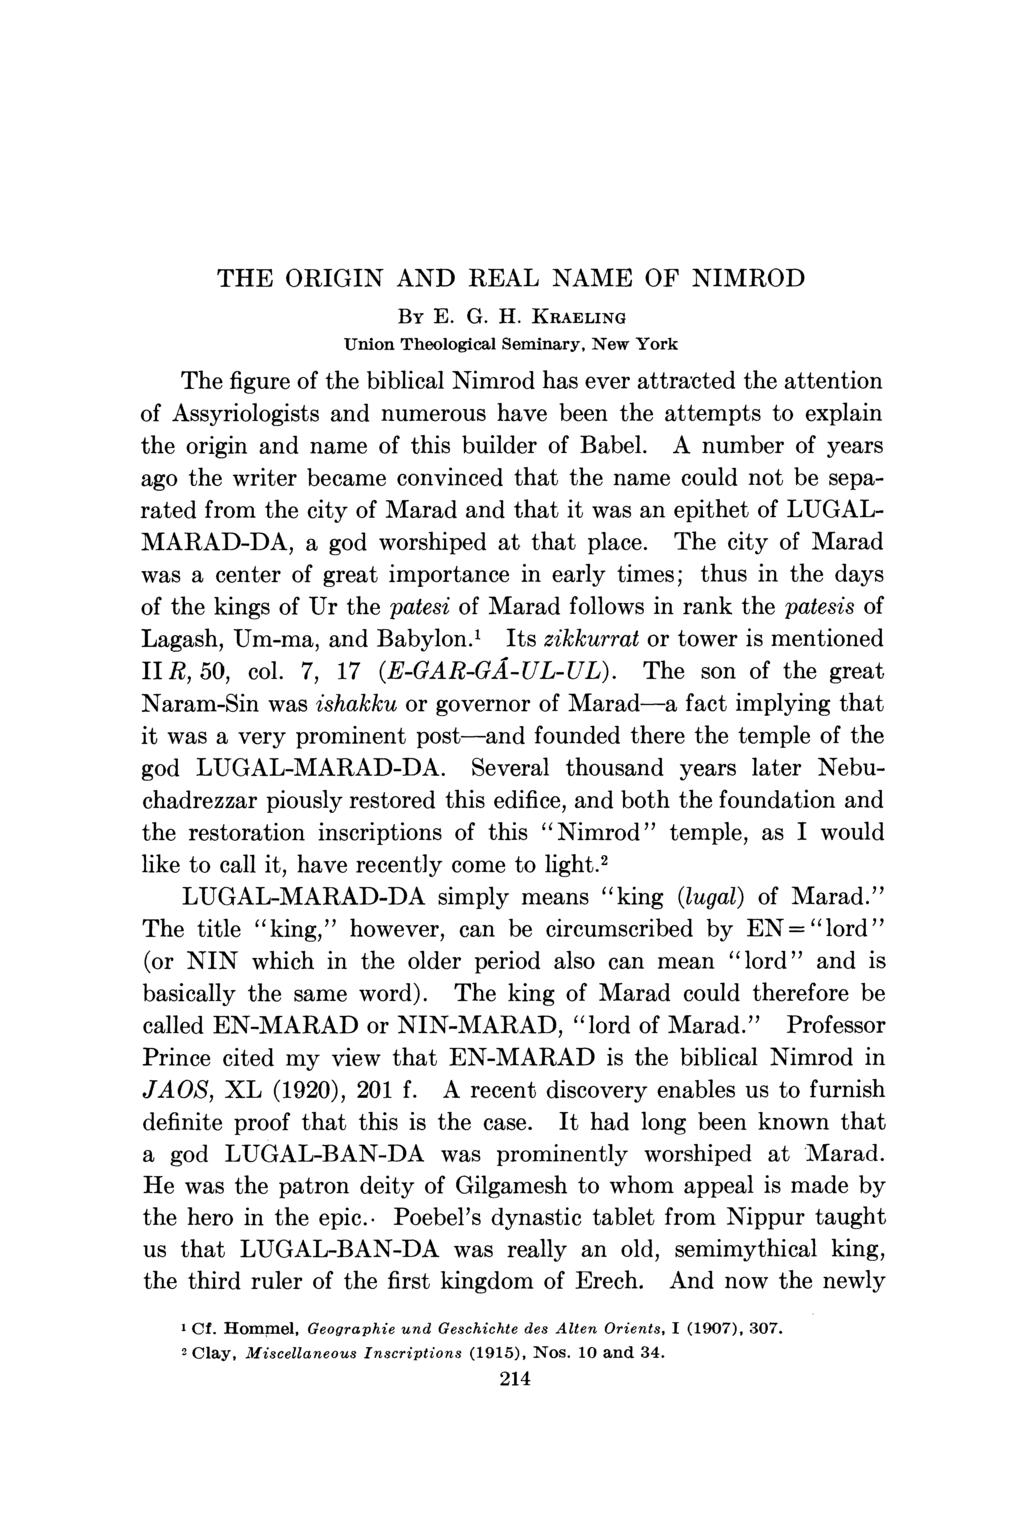 THE ORIGIN AND REAL NAME OF NIMROD BY E. G. H.